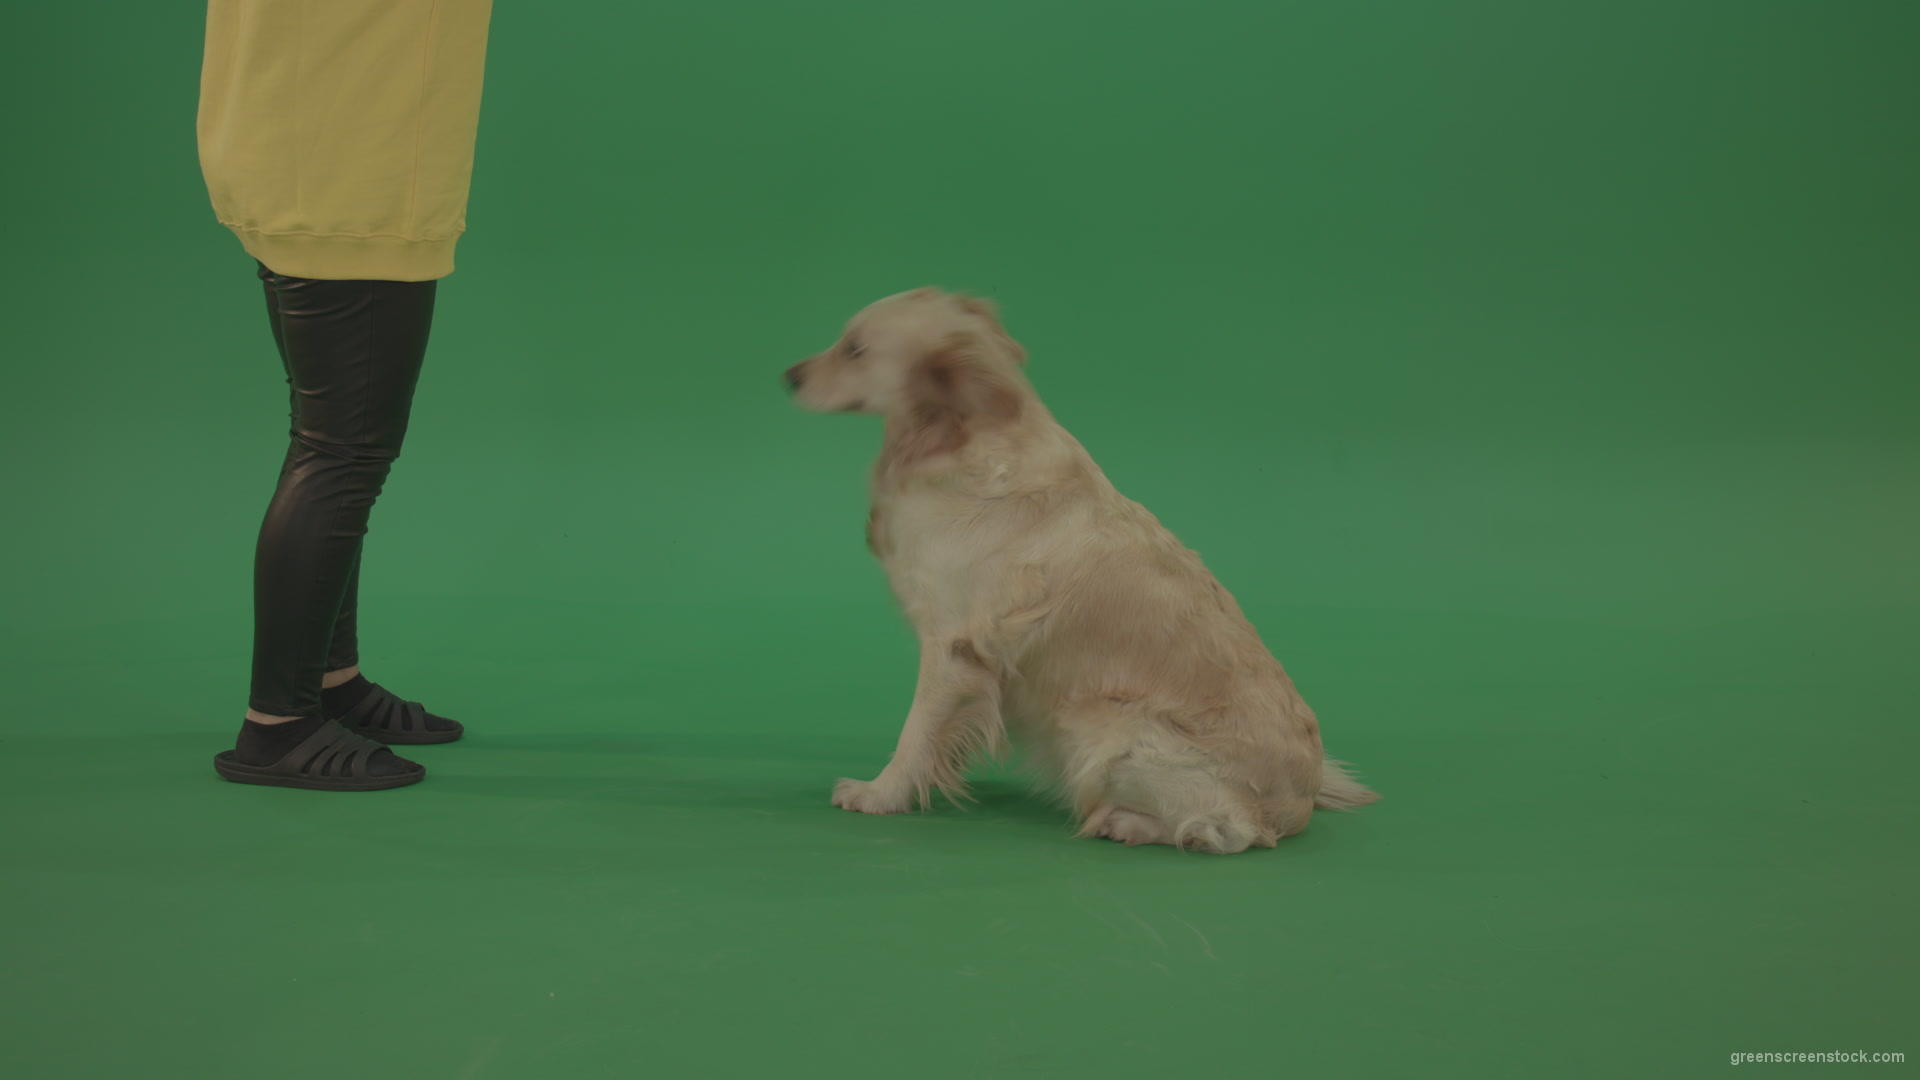 Golden-Retriever-hunter-Bird-Dog-sit-and-barking-to-owner-isolated-on-green-screen-4K-video-footage_001 Green Screen Stock